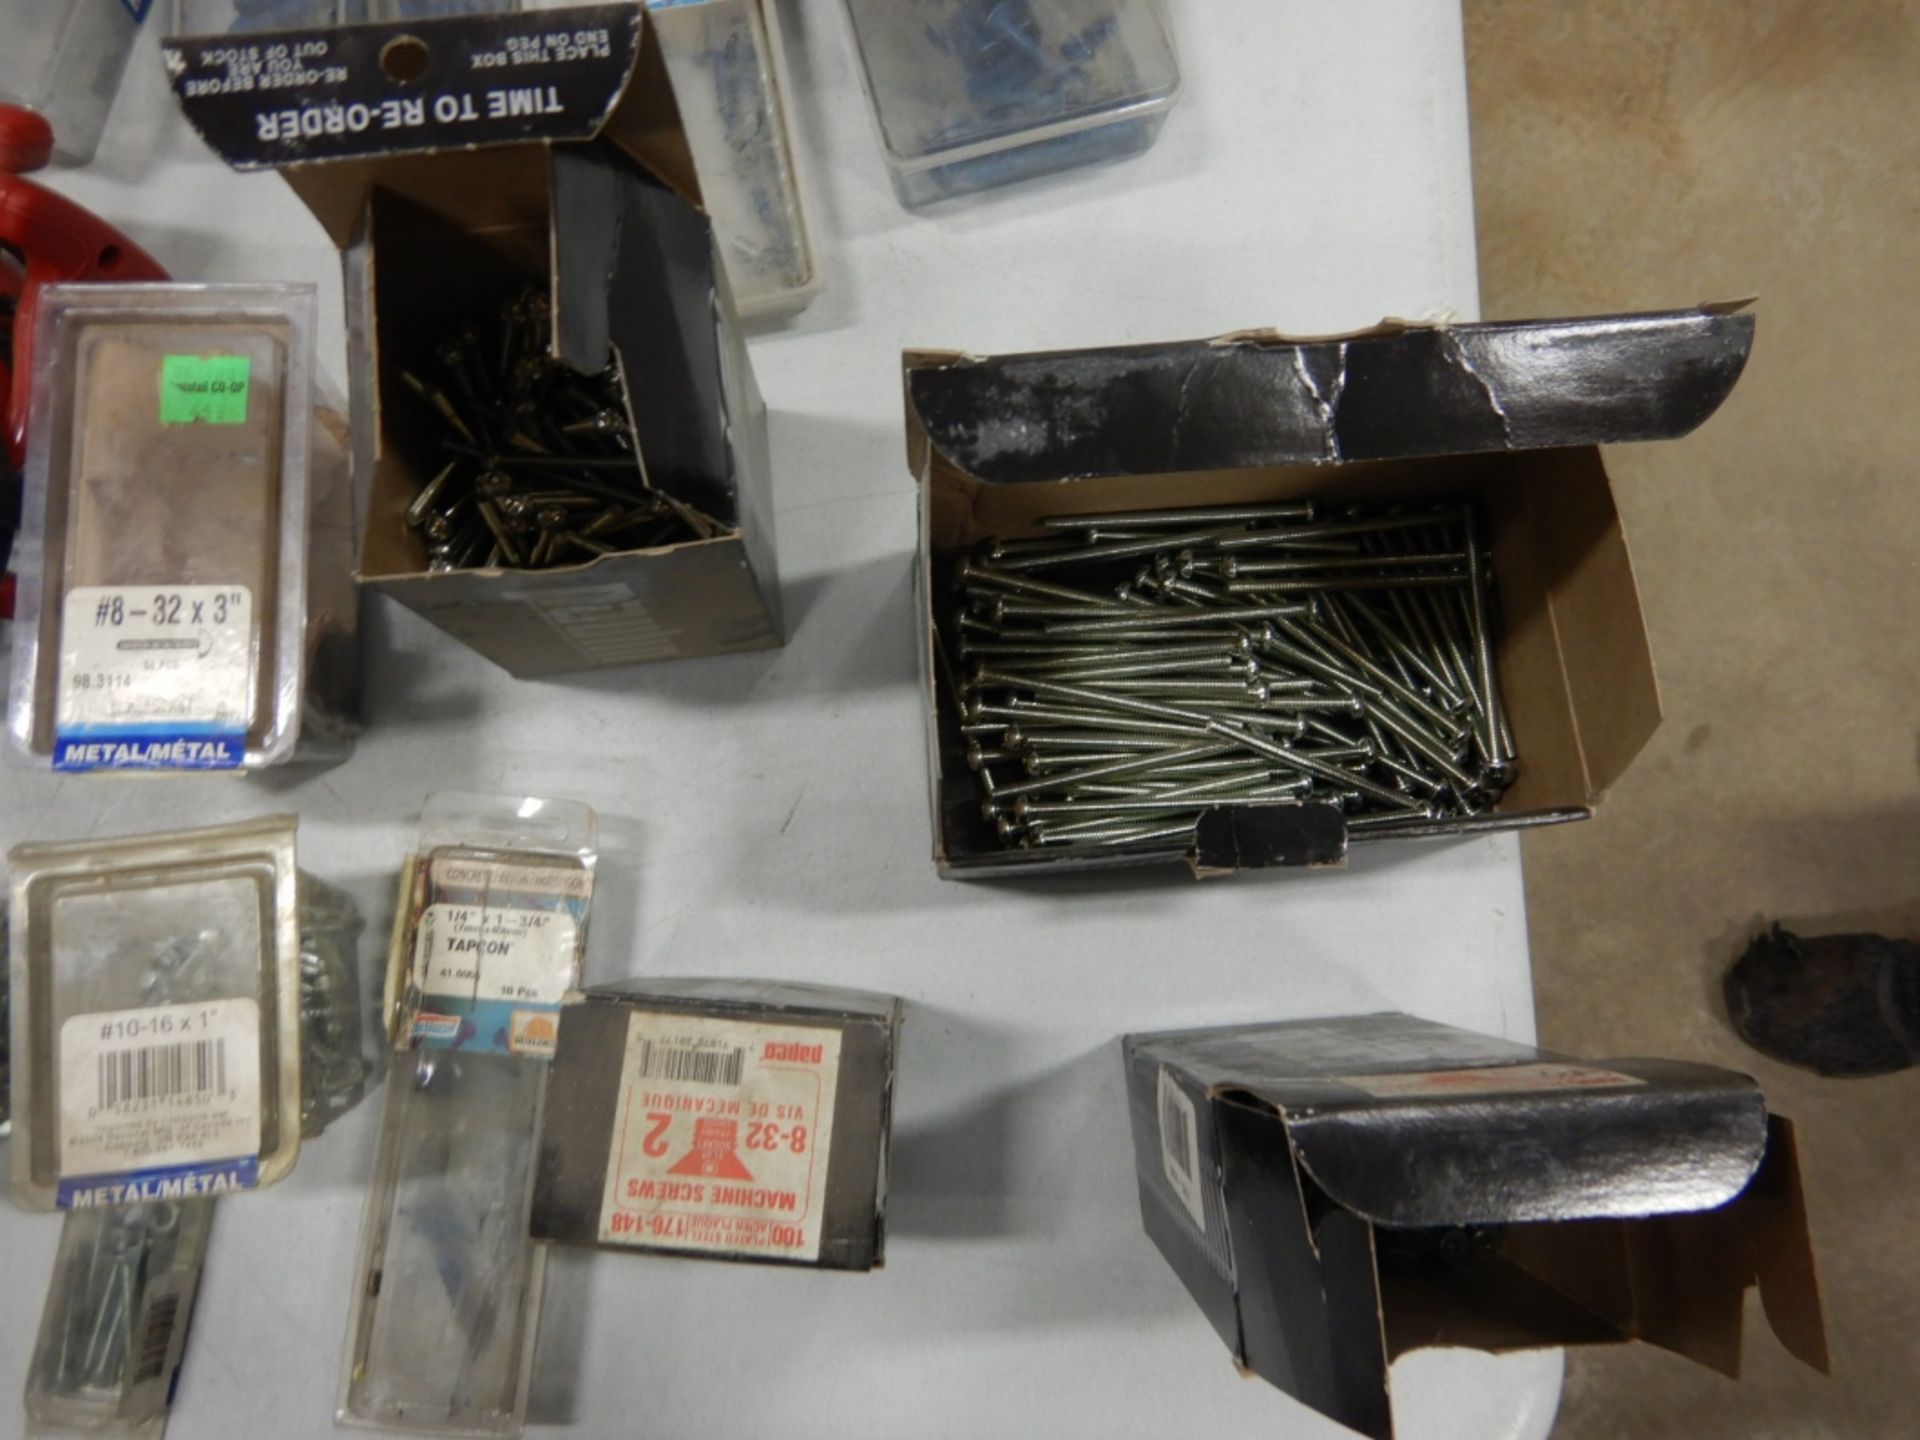 L/O ASSORTED SCREWS, HARDWARE, BOLTS, CABLE CLAMPS, ETC. - Image 2 of 5